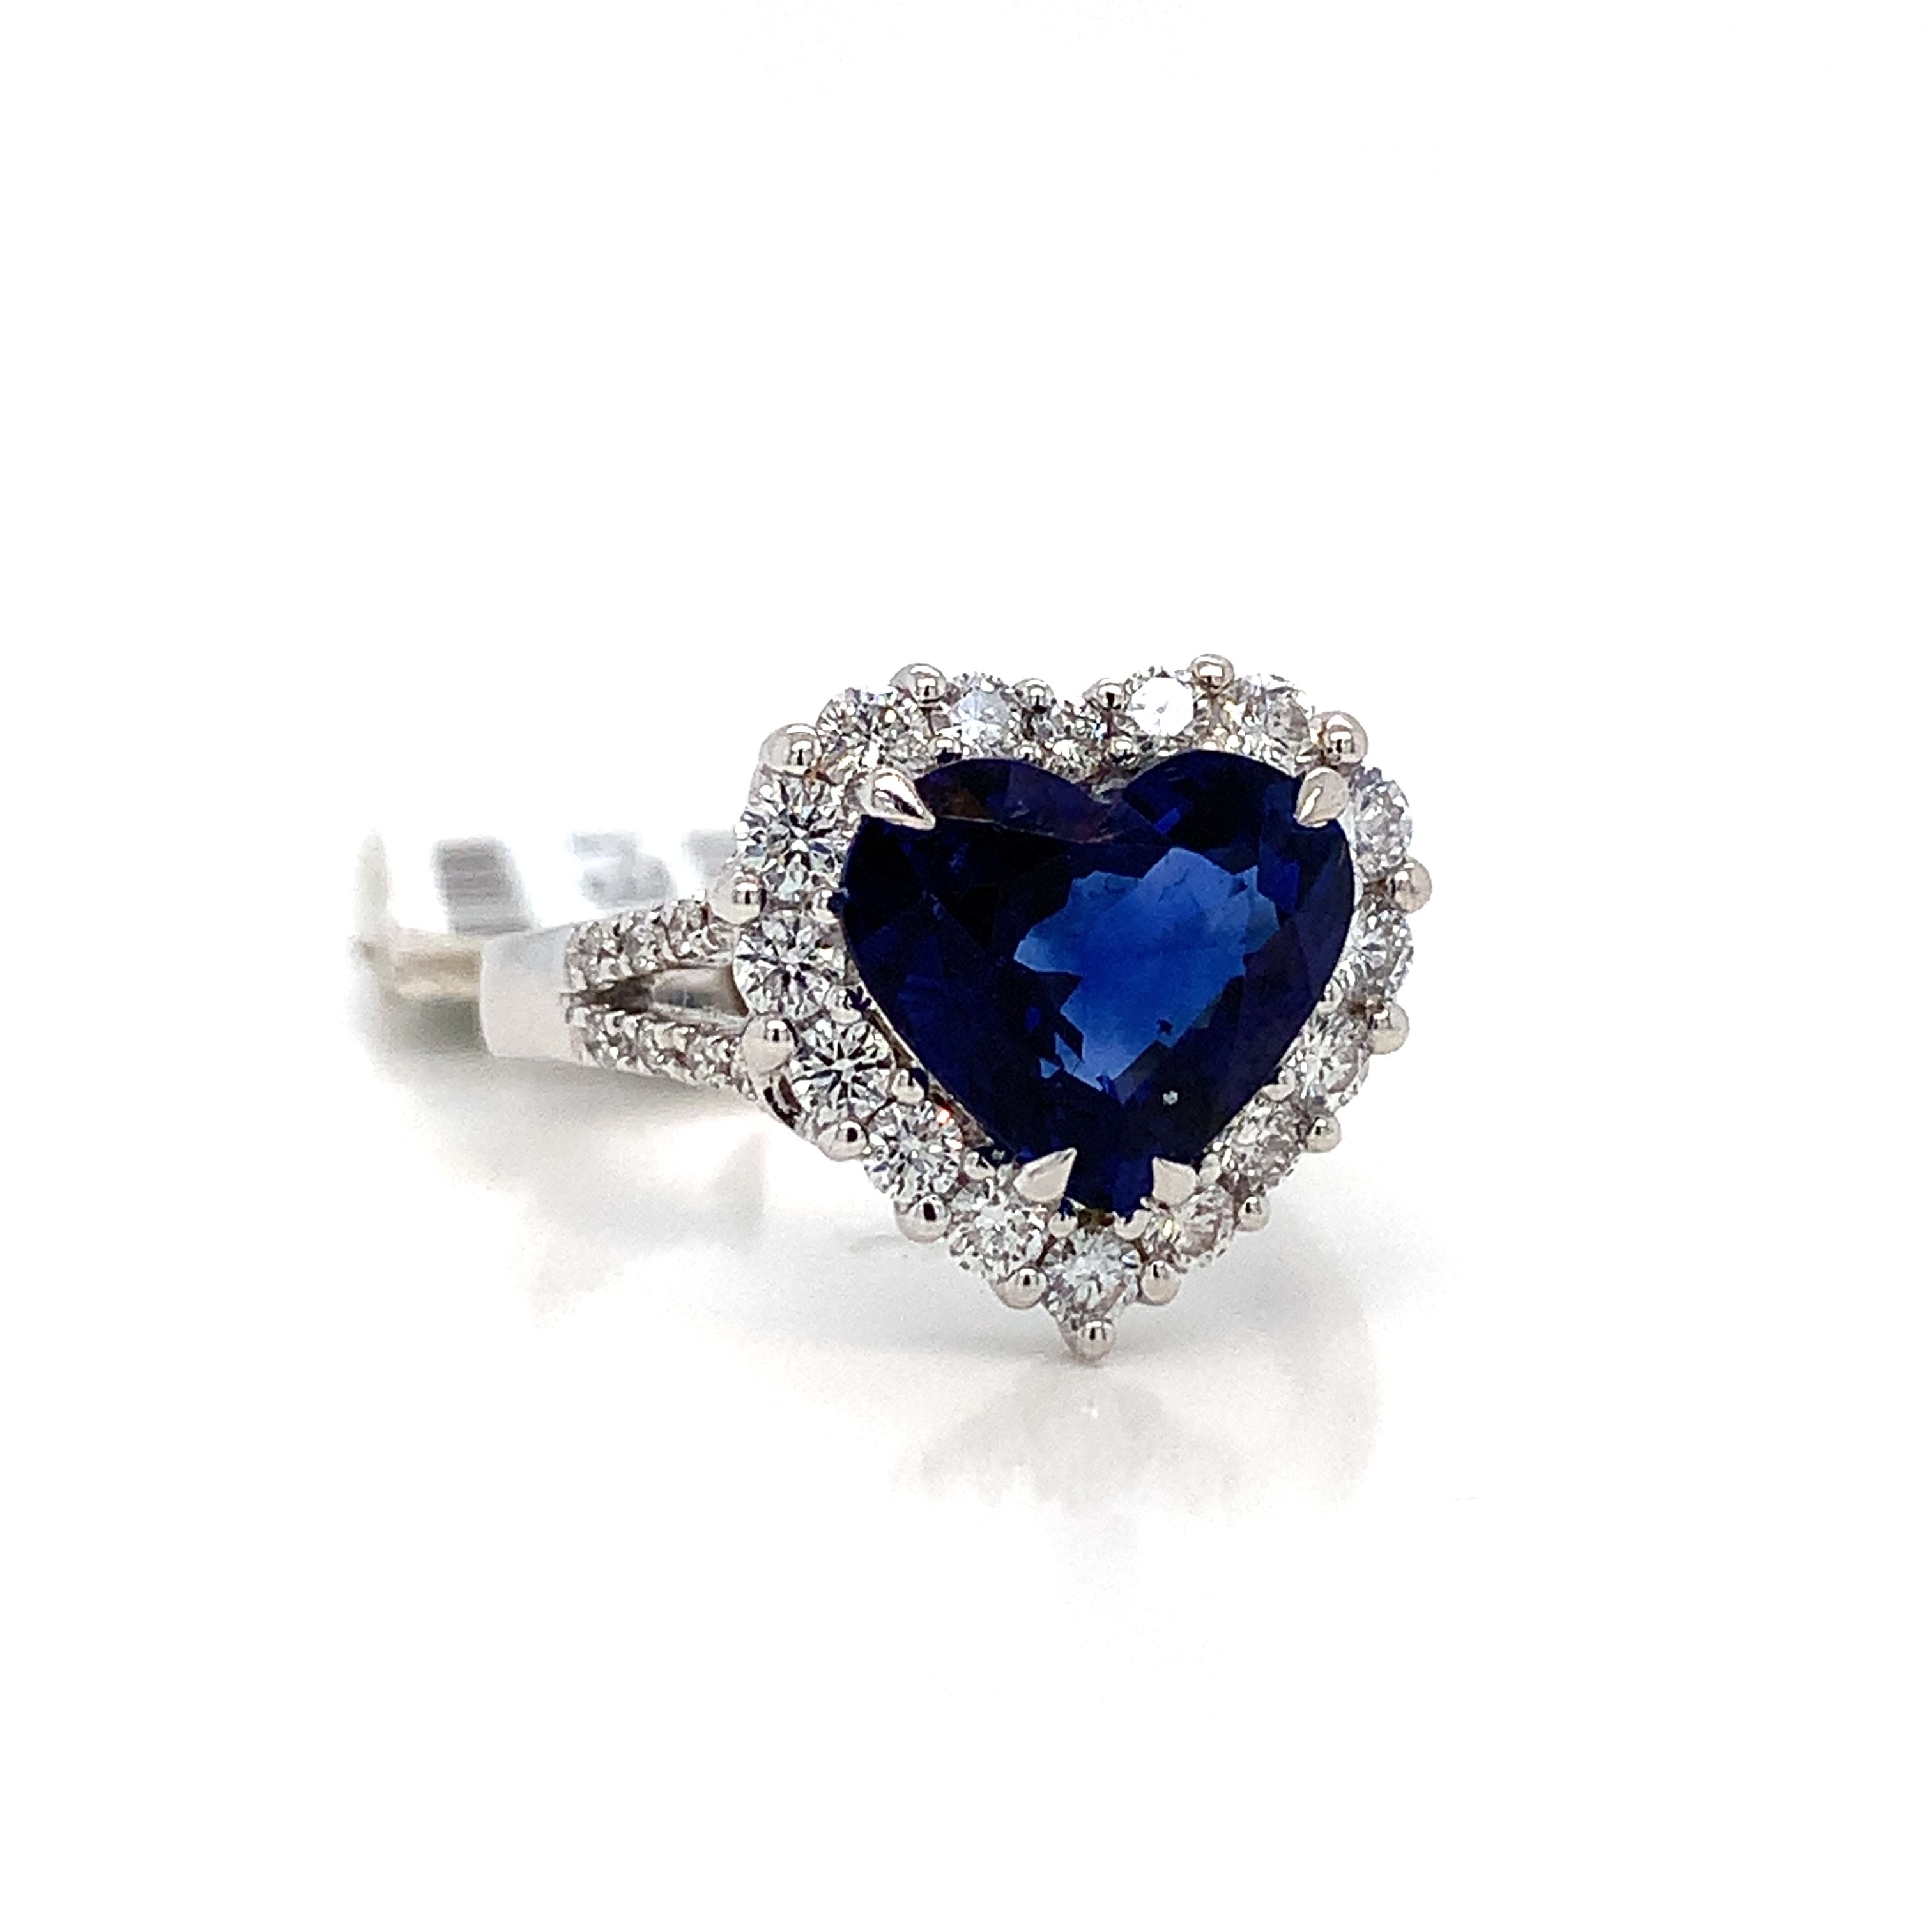 SAPPHIRE HEART SHAPED RING